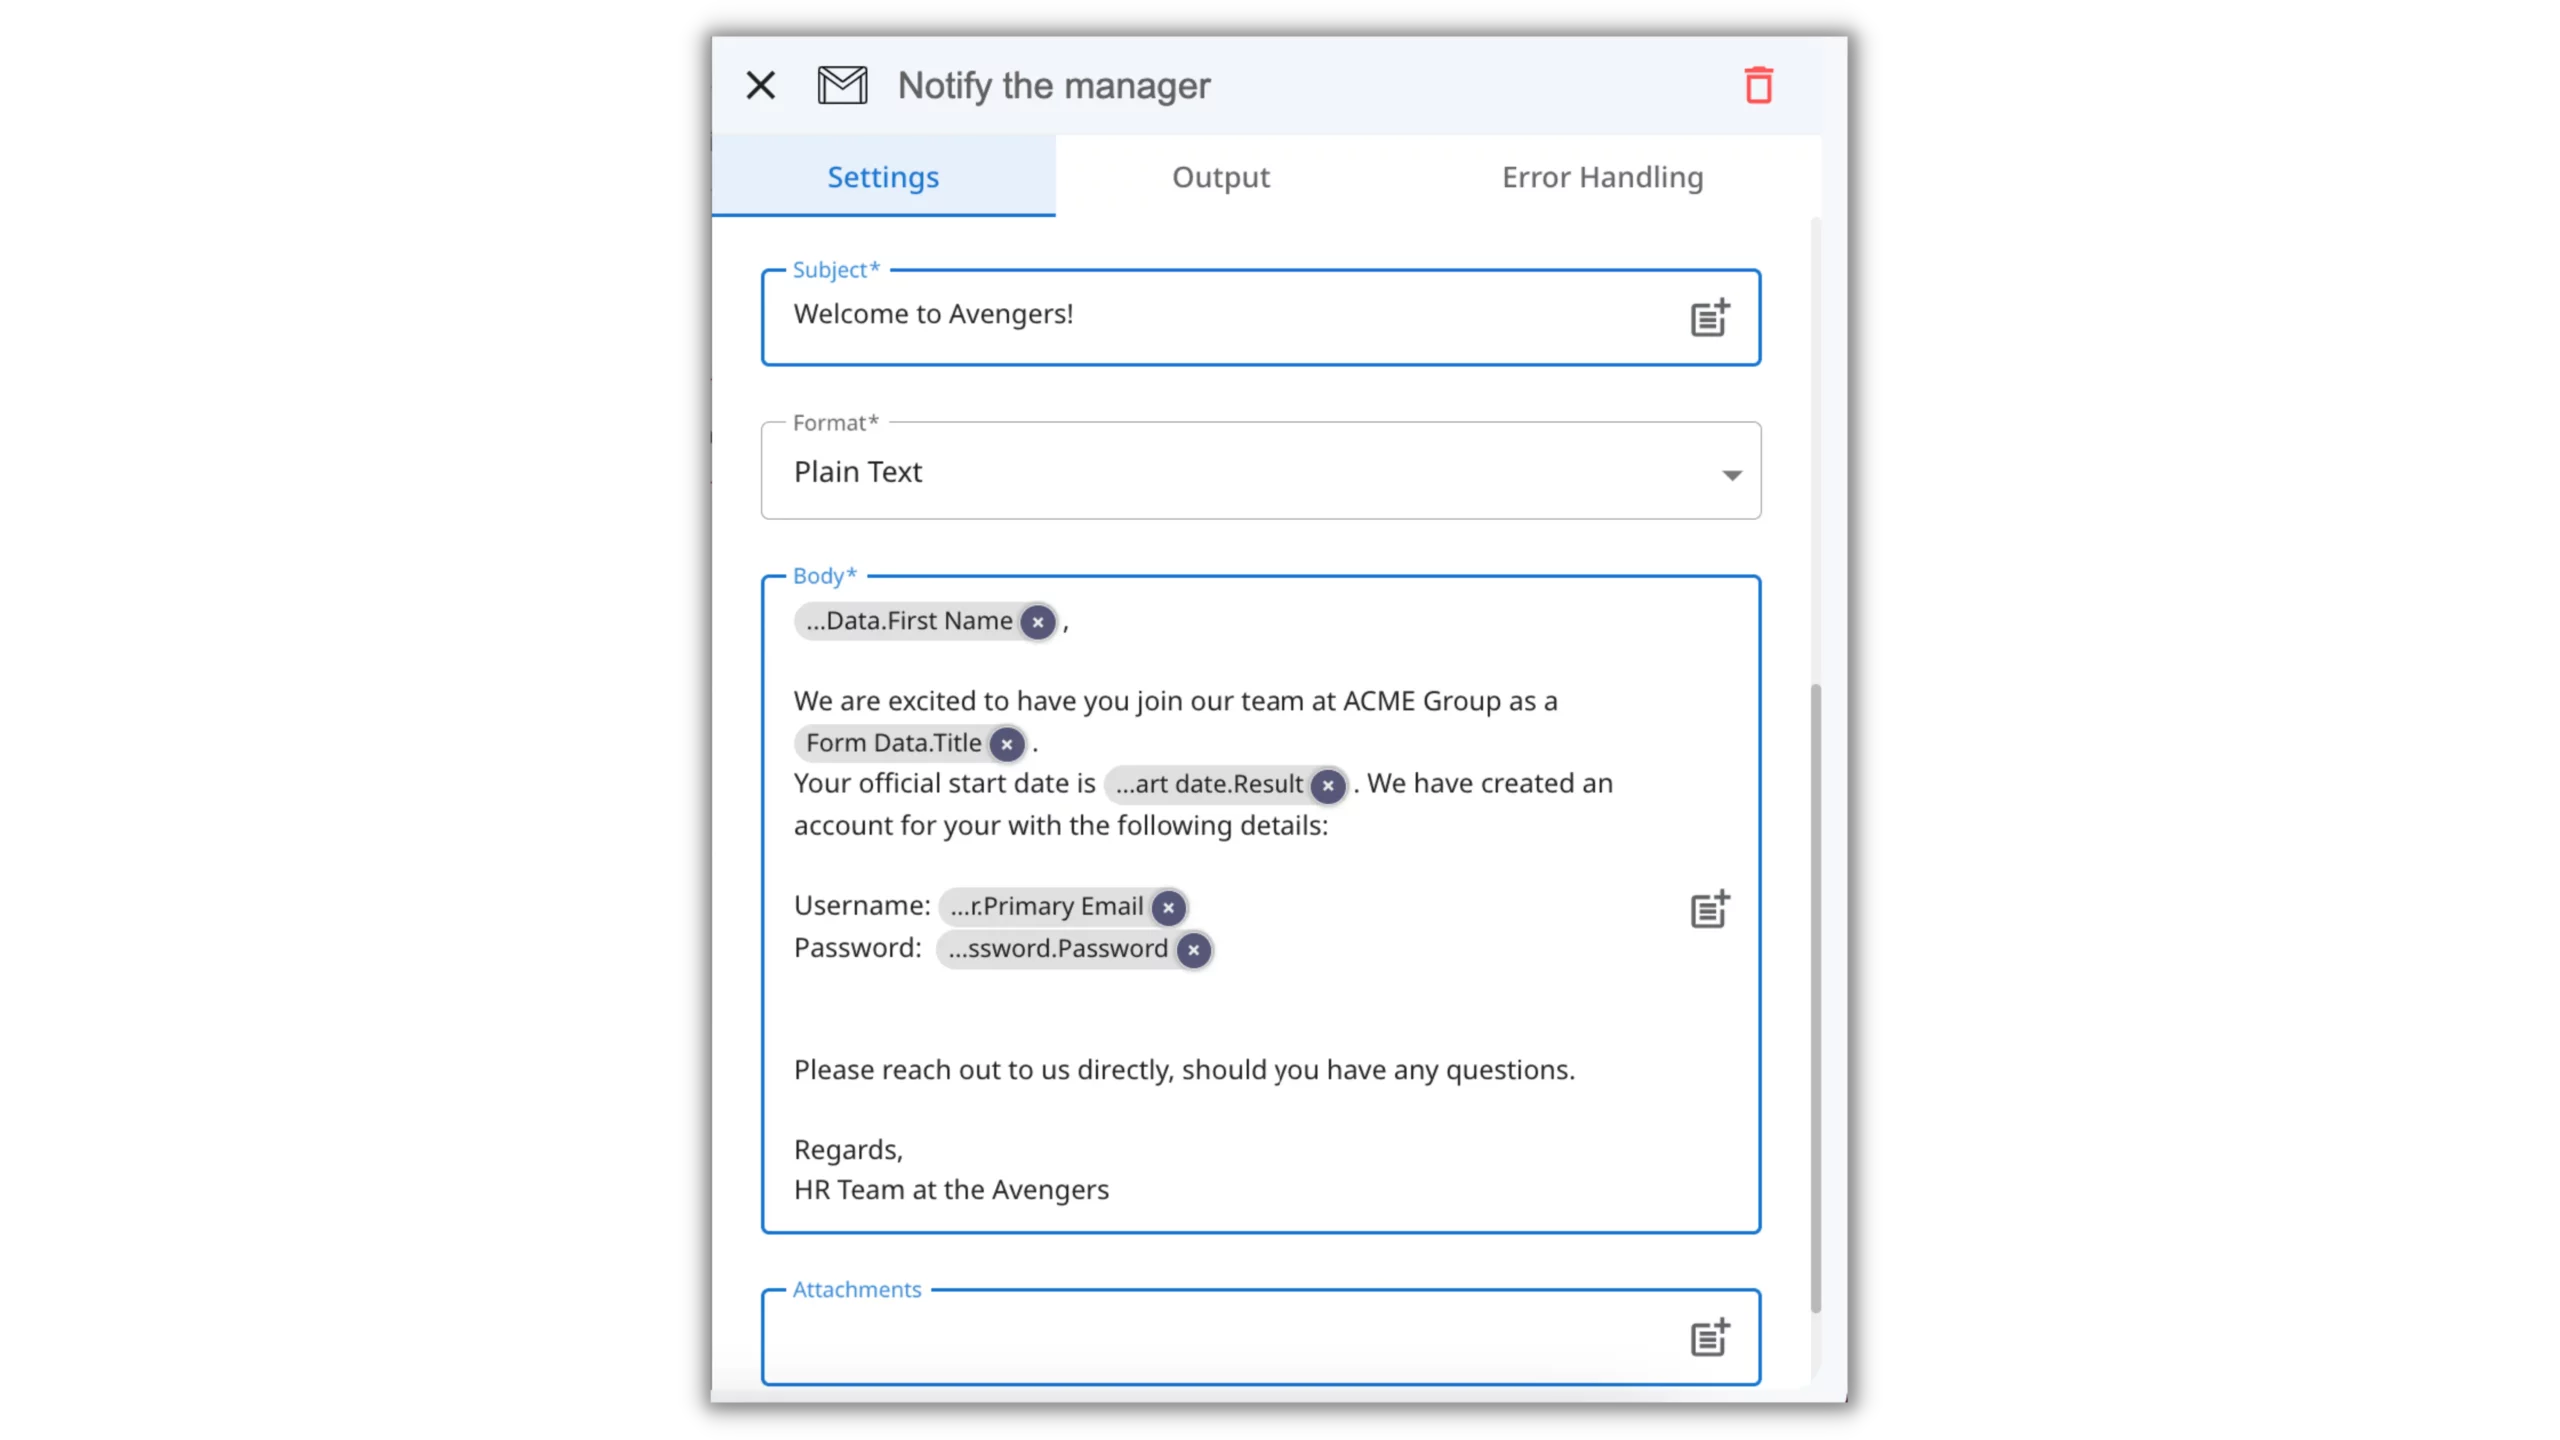 The demonstration of sending email as a part of the employee onboarding automation.